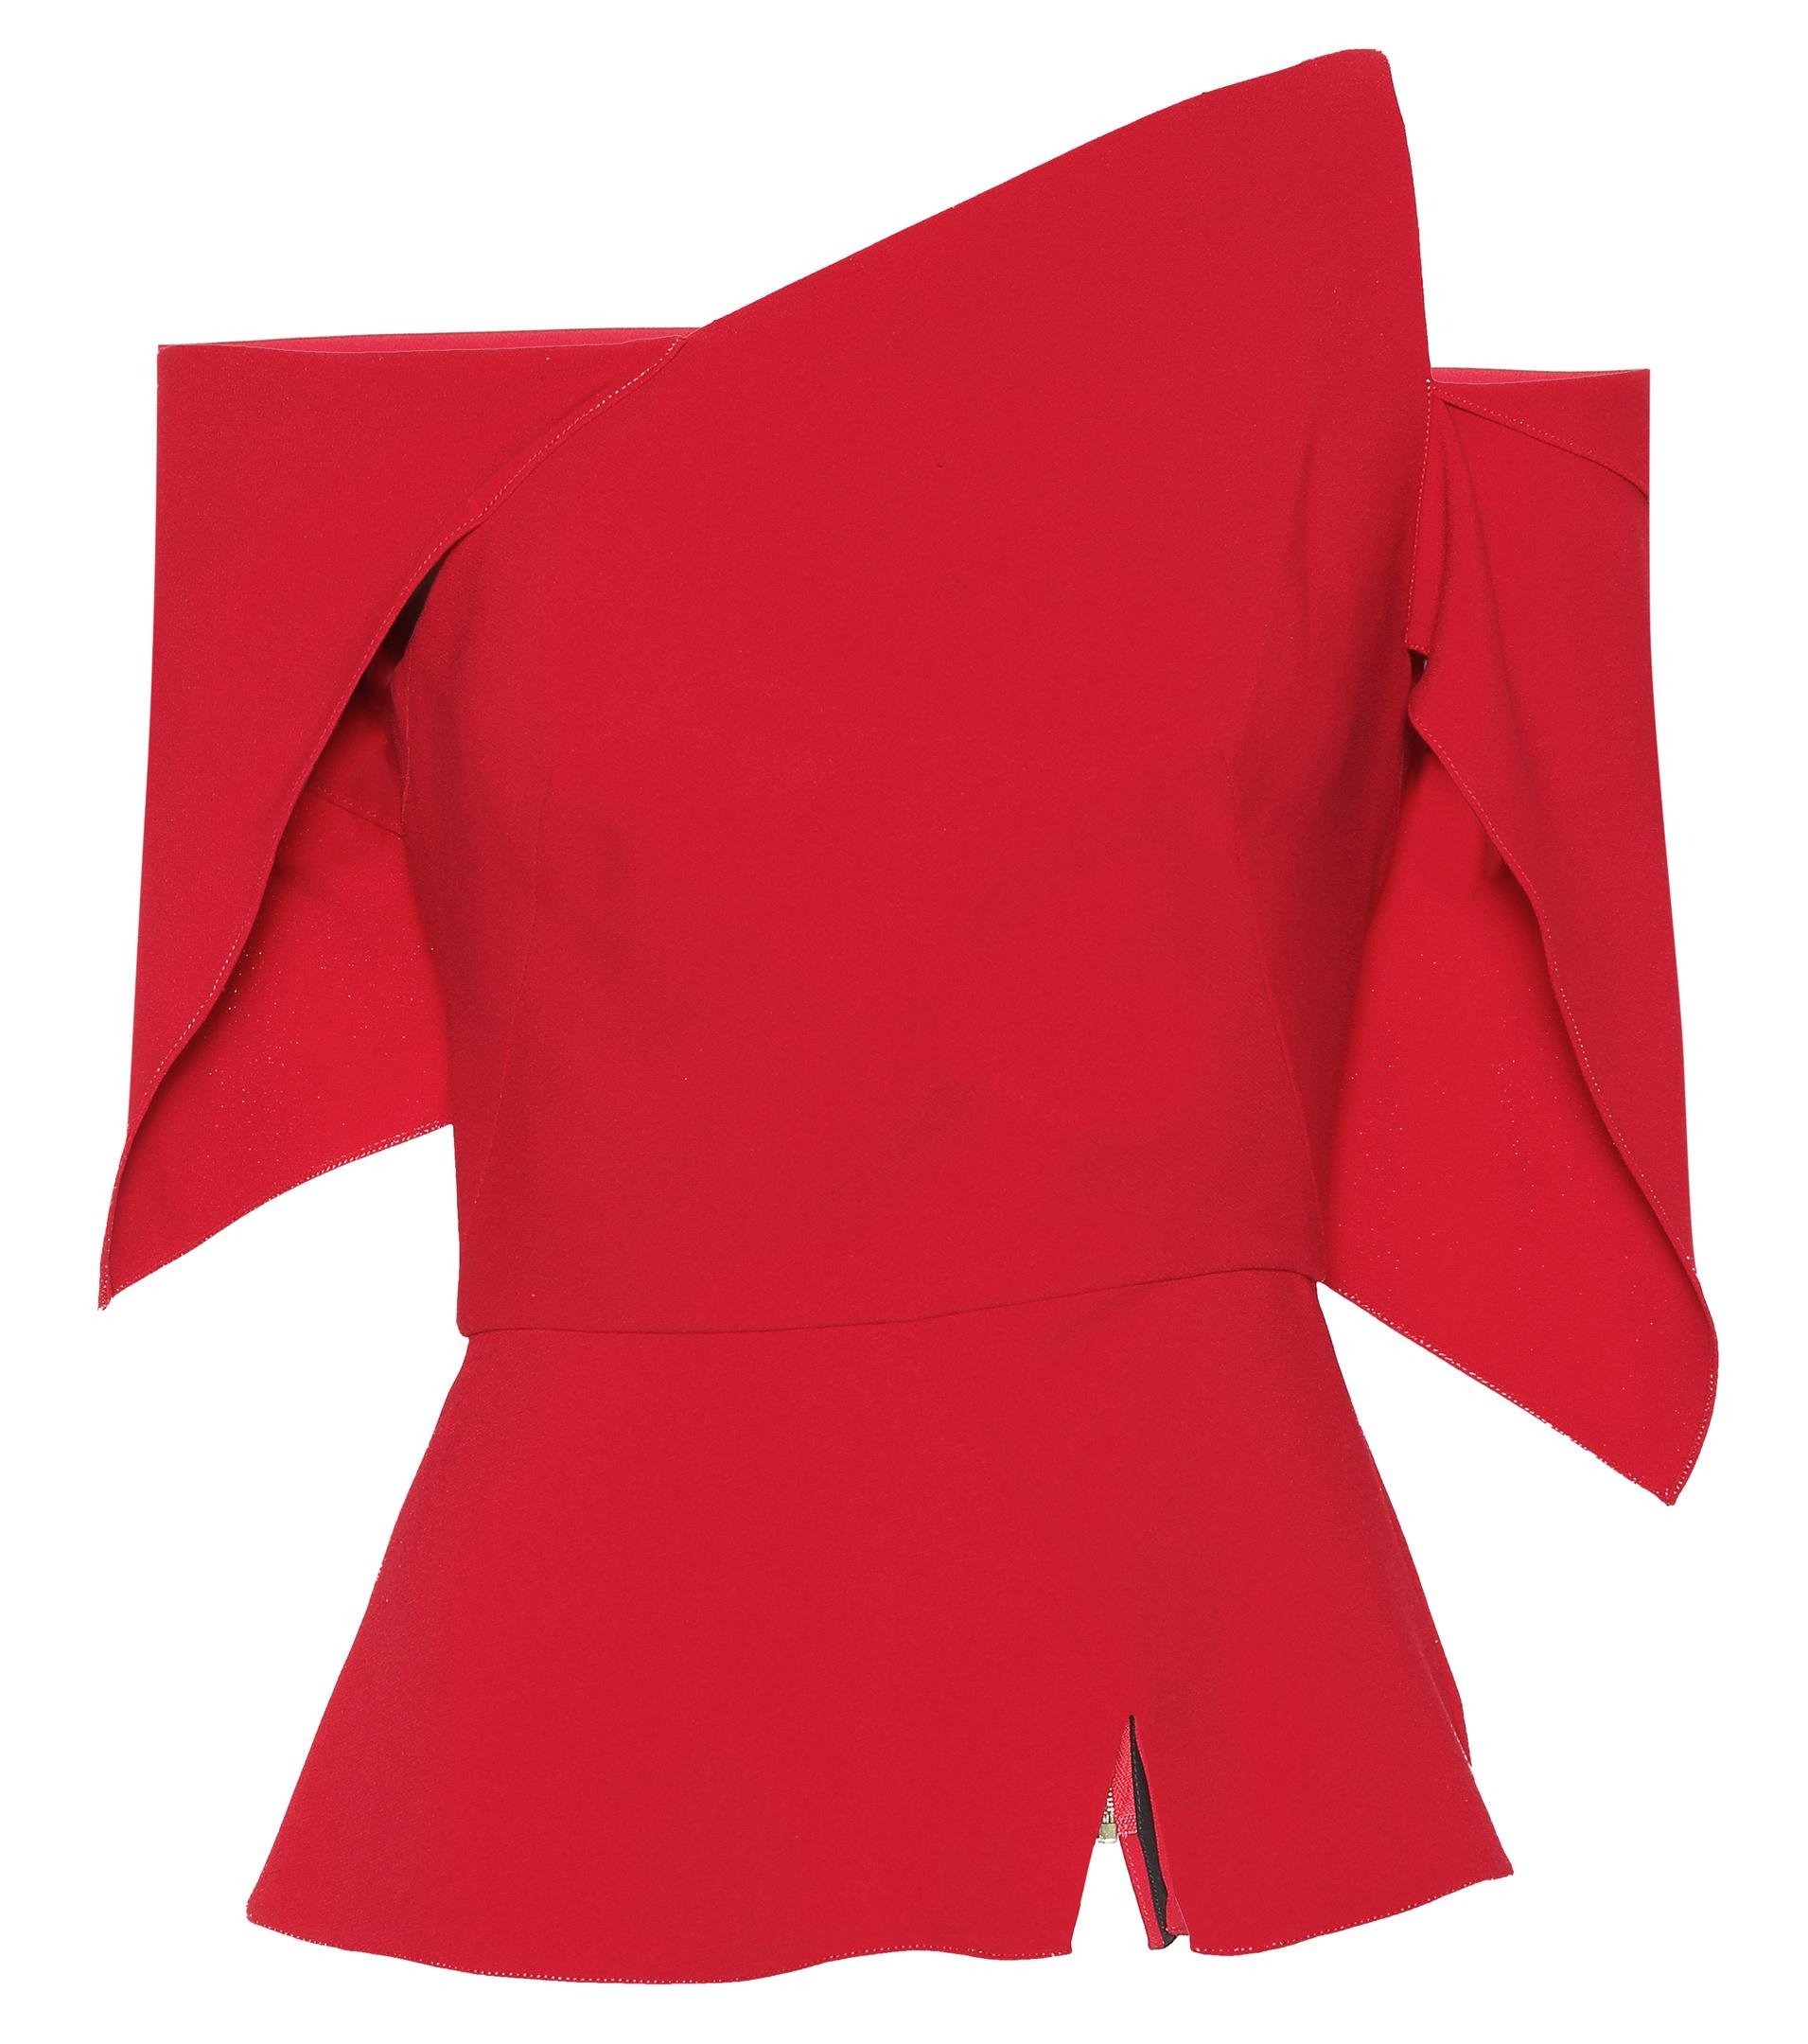 Roland Mouret Synthetic Scott Crêpe Top in Red - Lyst